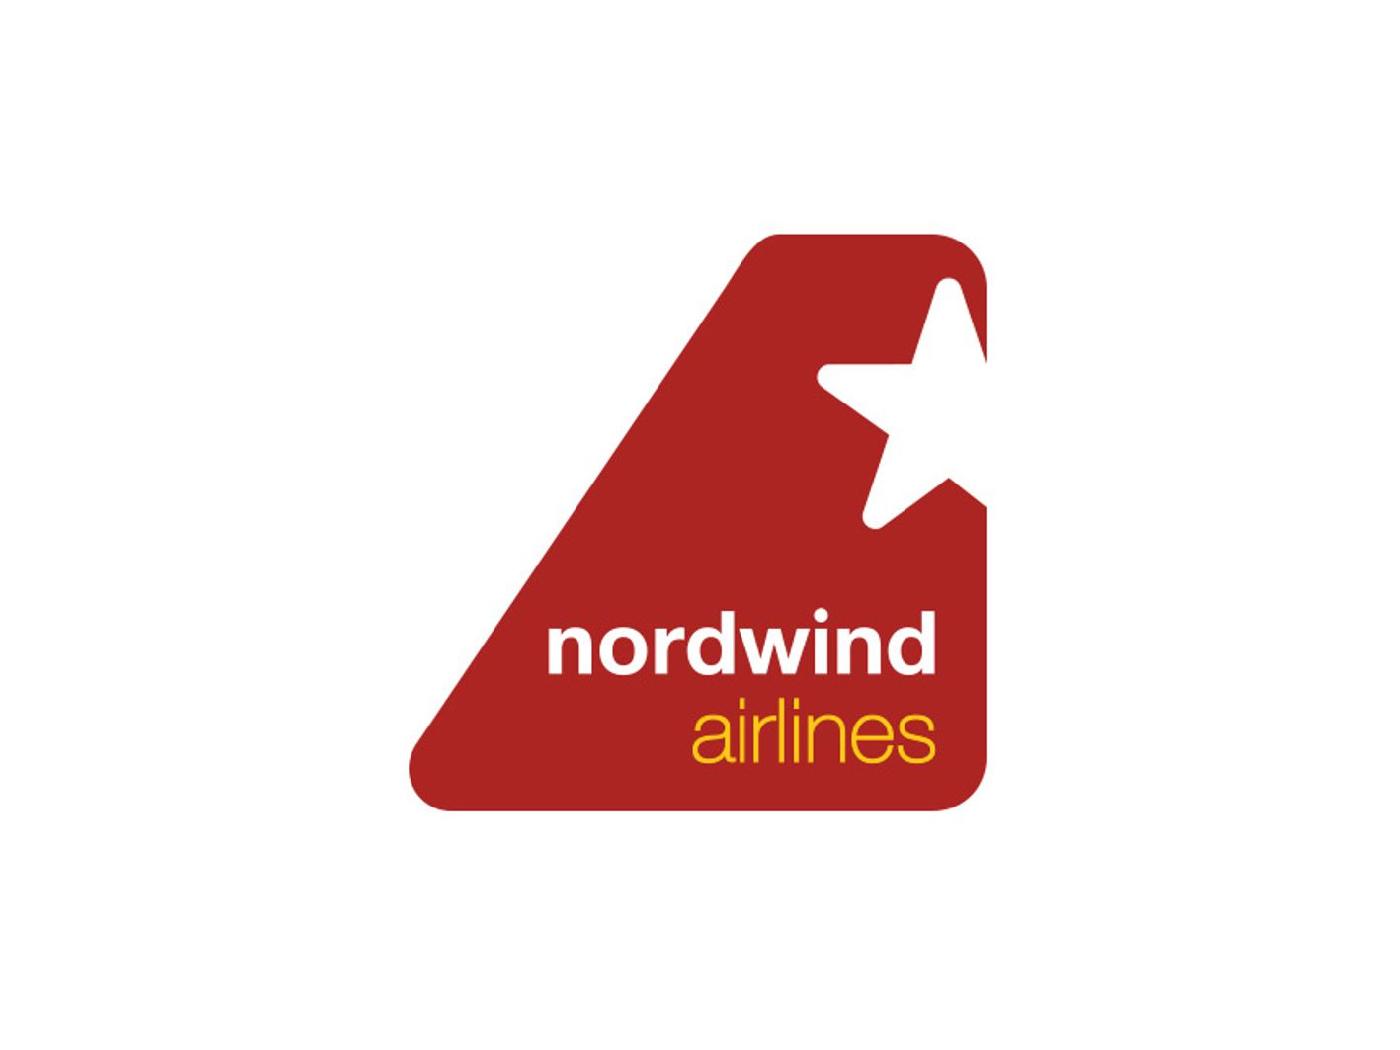  Nordwind Airlines